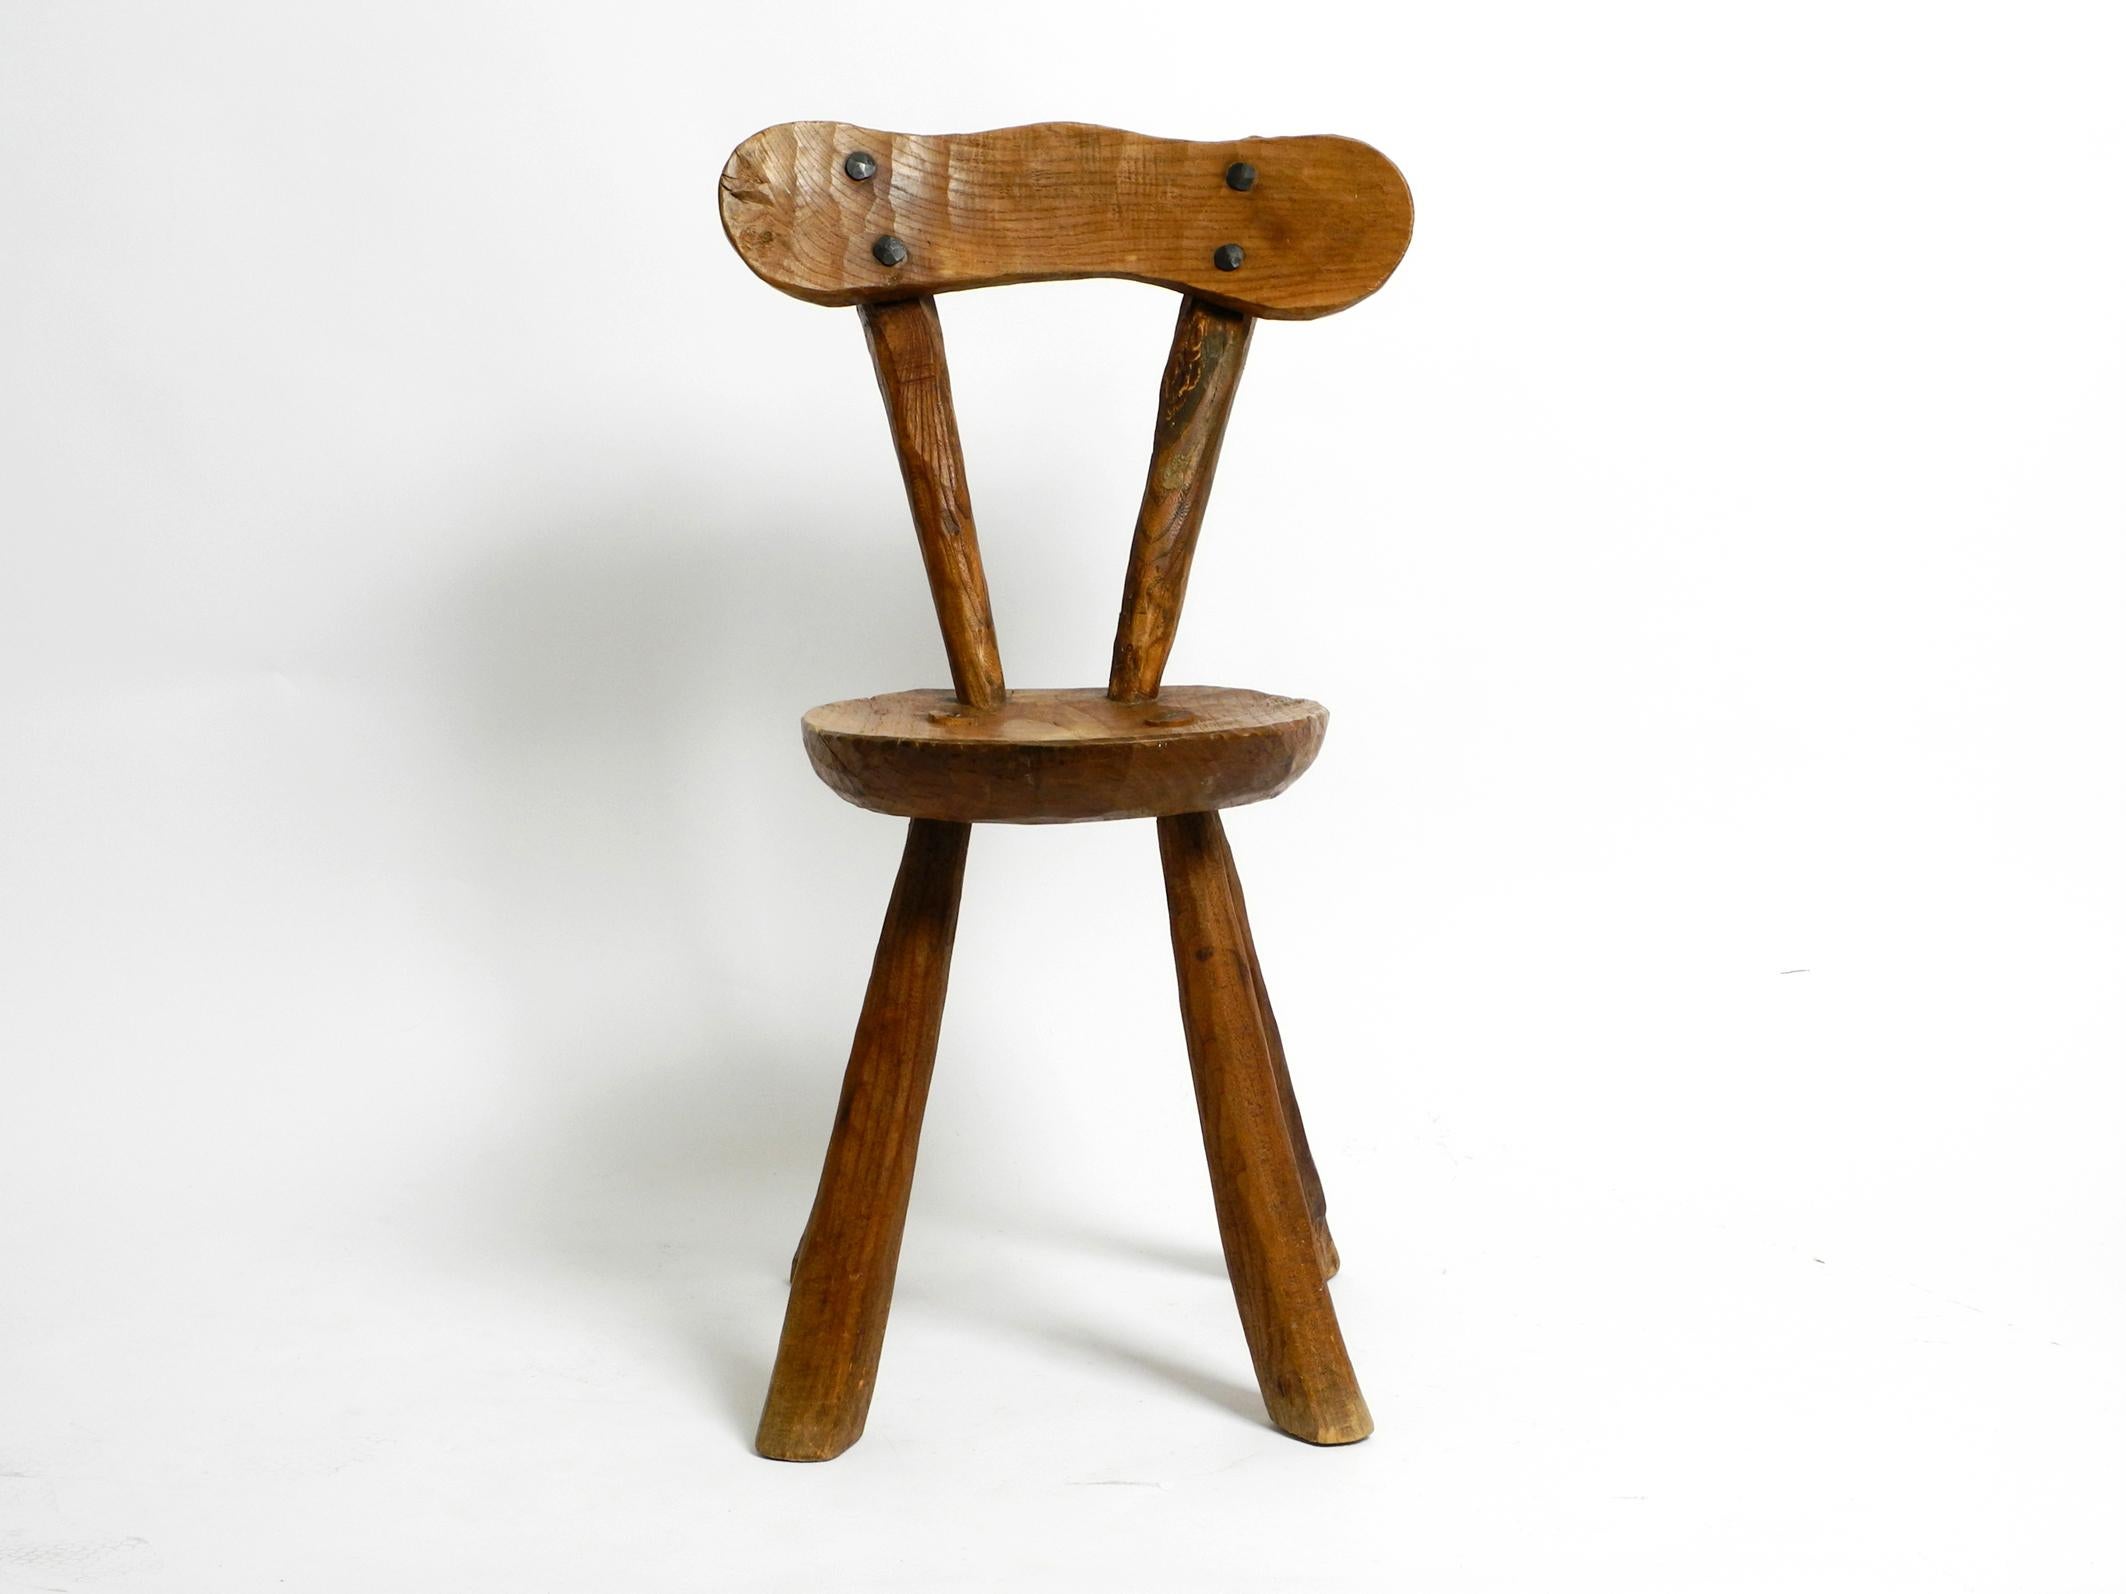 Beautiful, very rare austrian midcentury peasant chair made of spruce wood.
Great elaborate production. Found in Tirol Austria.
With a gorgeous patina. Very good vintage condition and 100% original. No woodworm damage.
Not wobbly, legs firm and